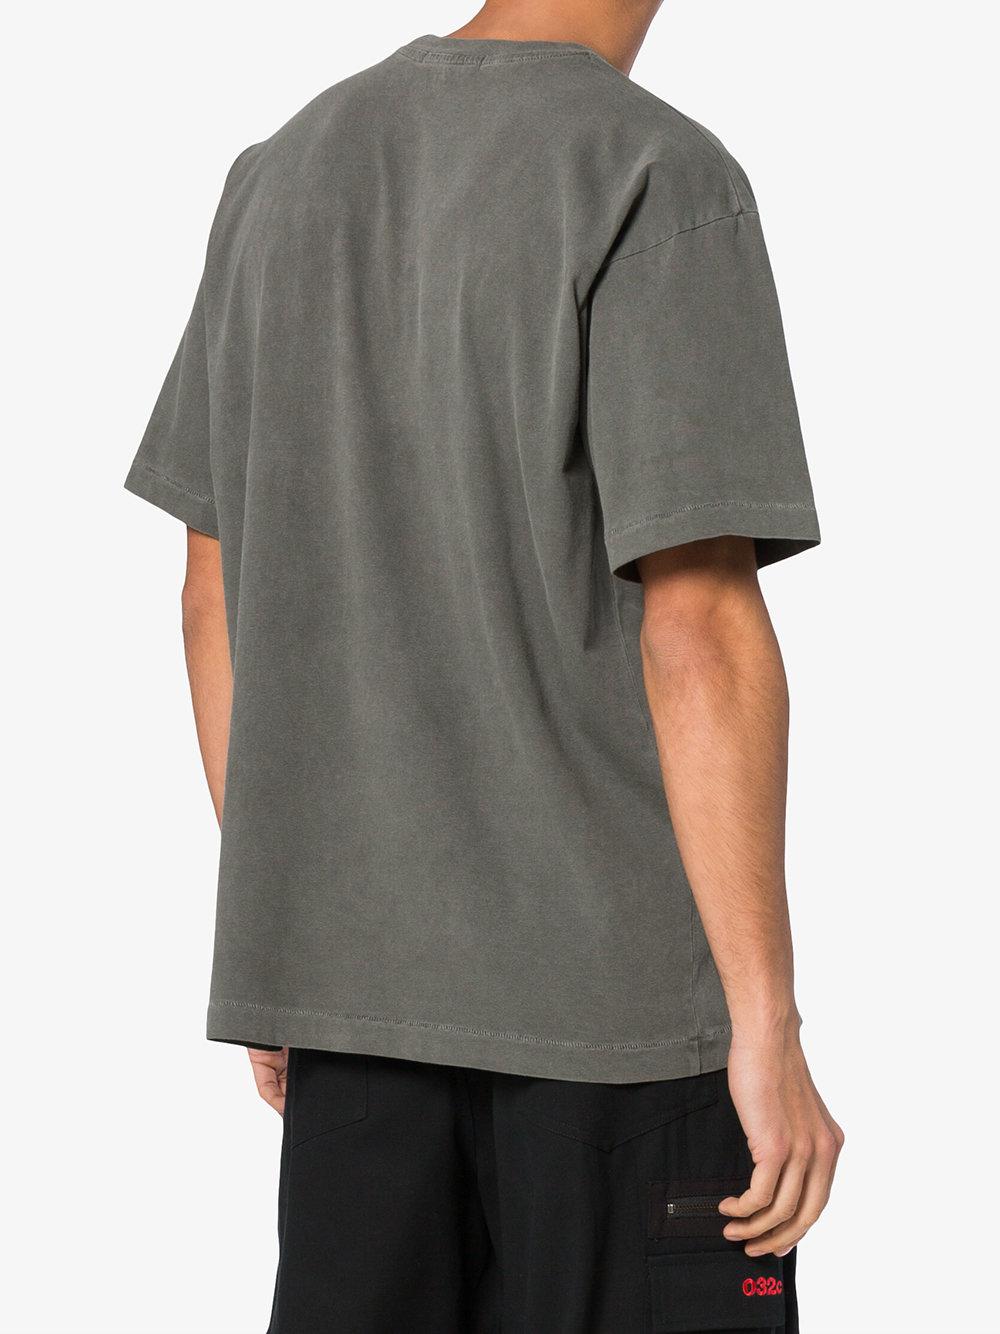 Yeezy Classic Cotton Short Sleeve T Shirt in Grey (Gray) for Men - Lyst